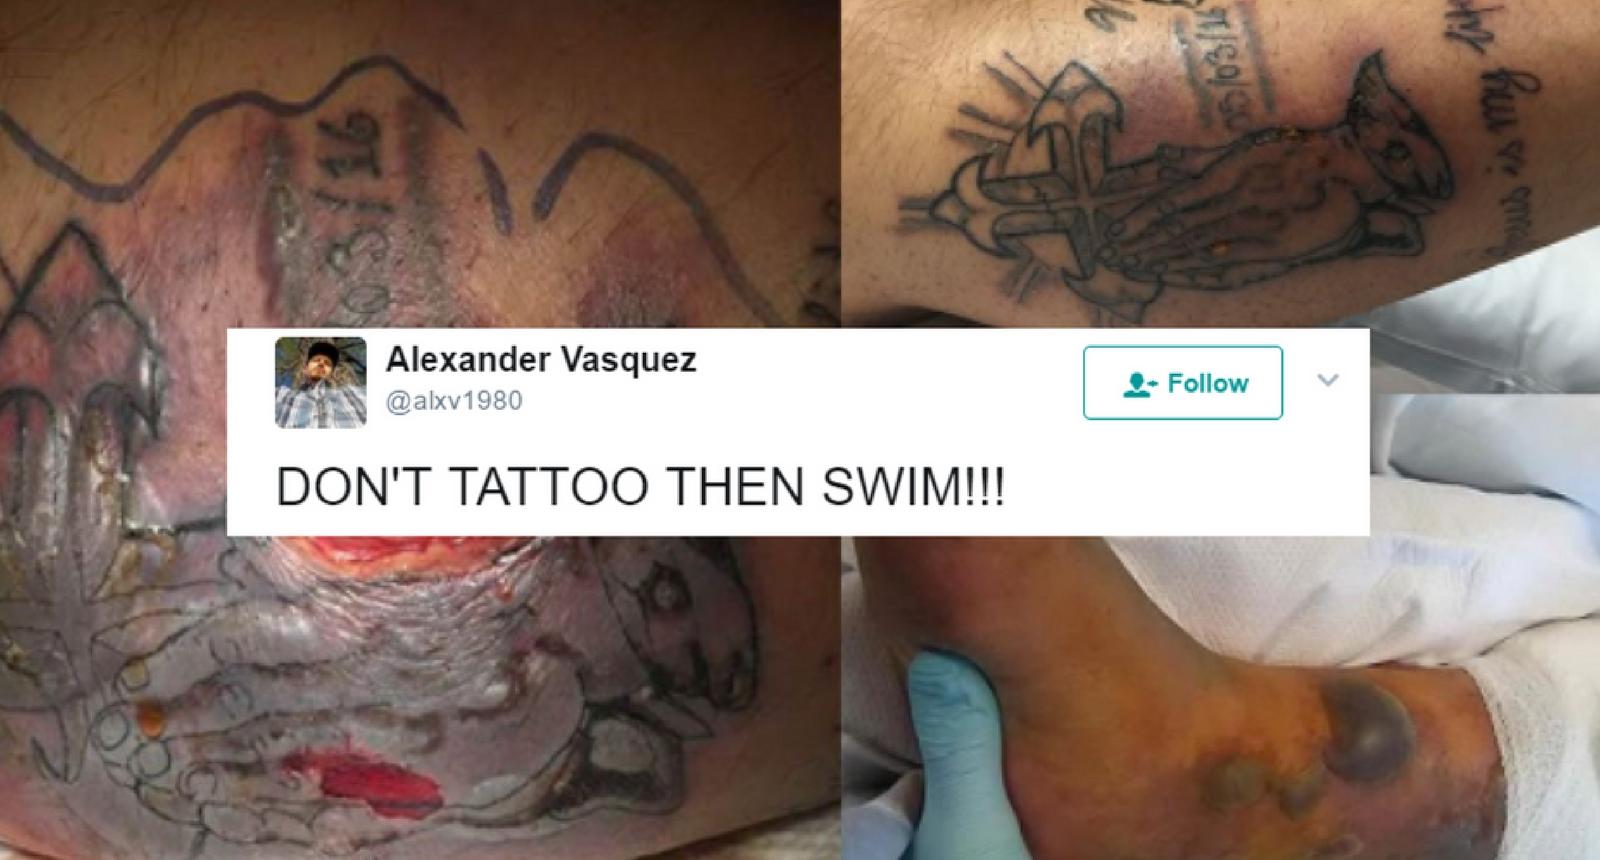 Can You Swim After Getting A Tattoo Touched Up Man Dies From Swimming After Tattoo